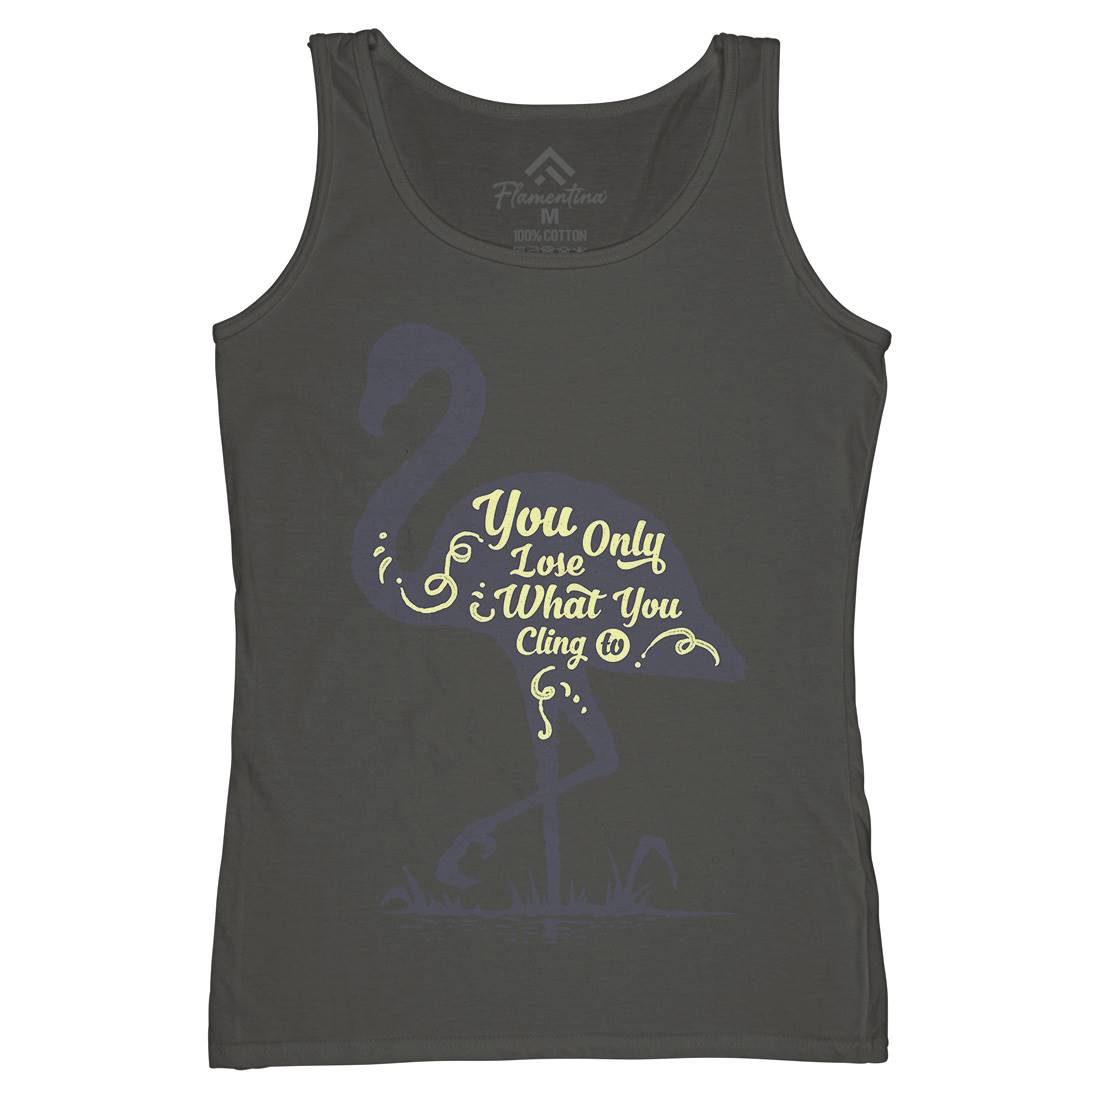 You Only Lose Womens Organic Tank Top Vest Quotes A395